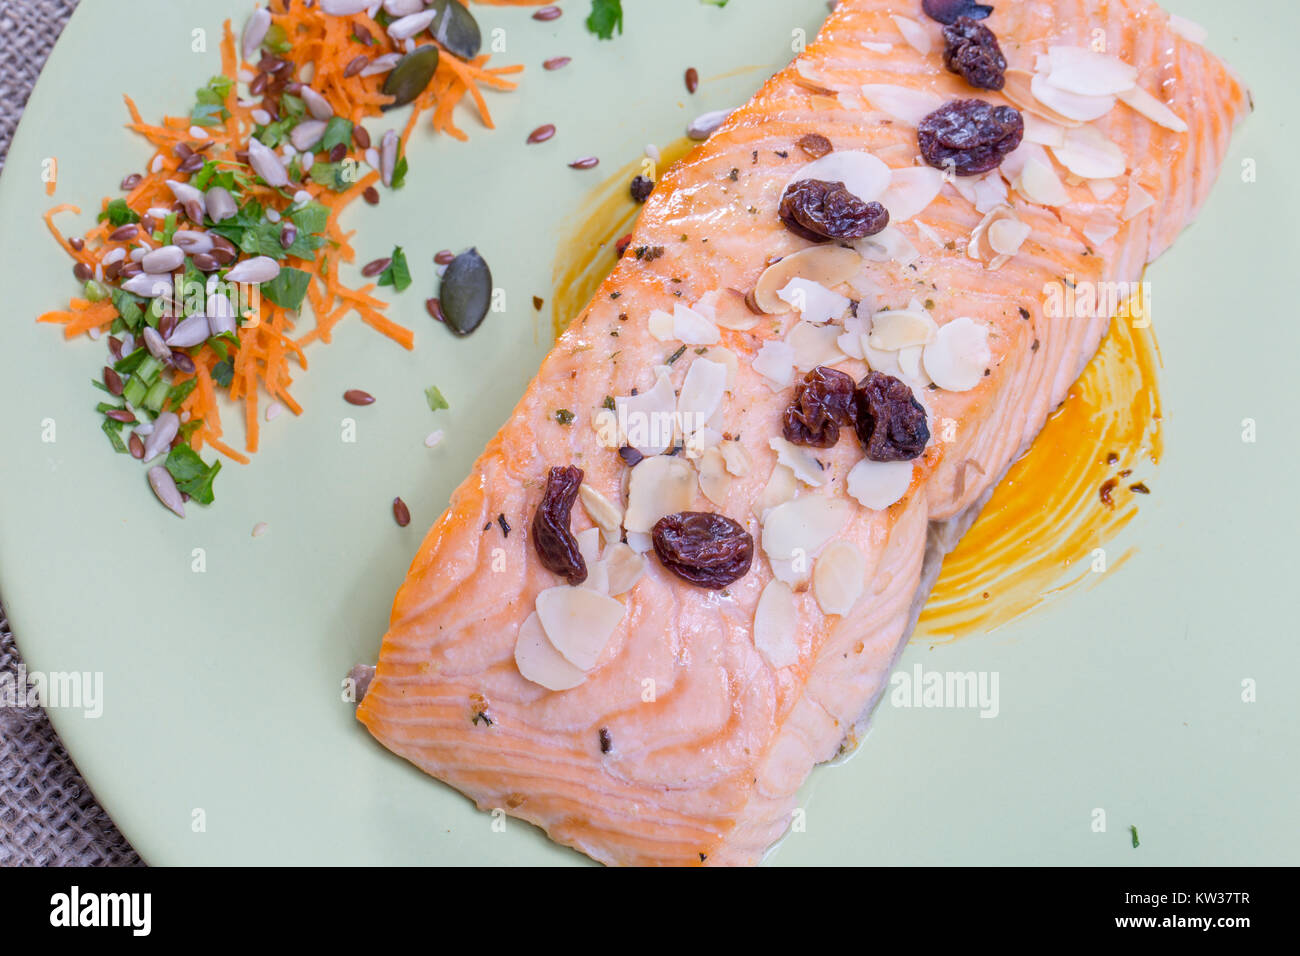 close up salmon steak on a green plate Stock Photo